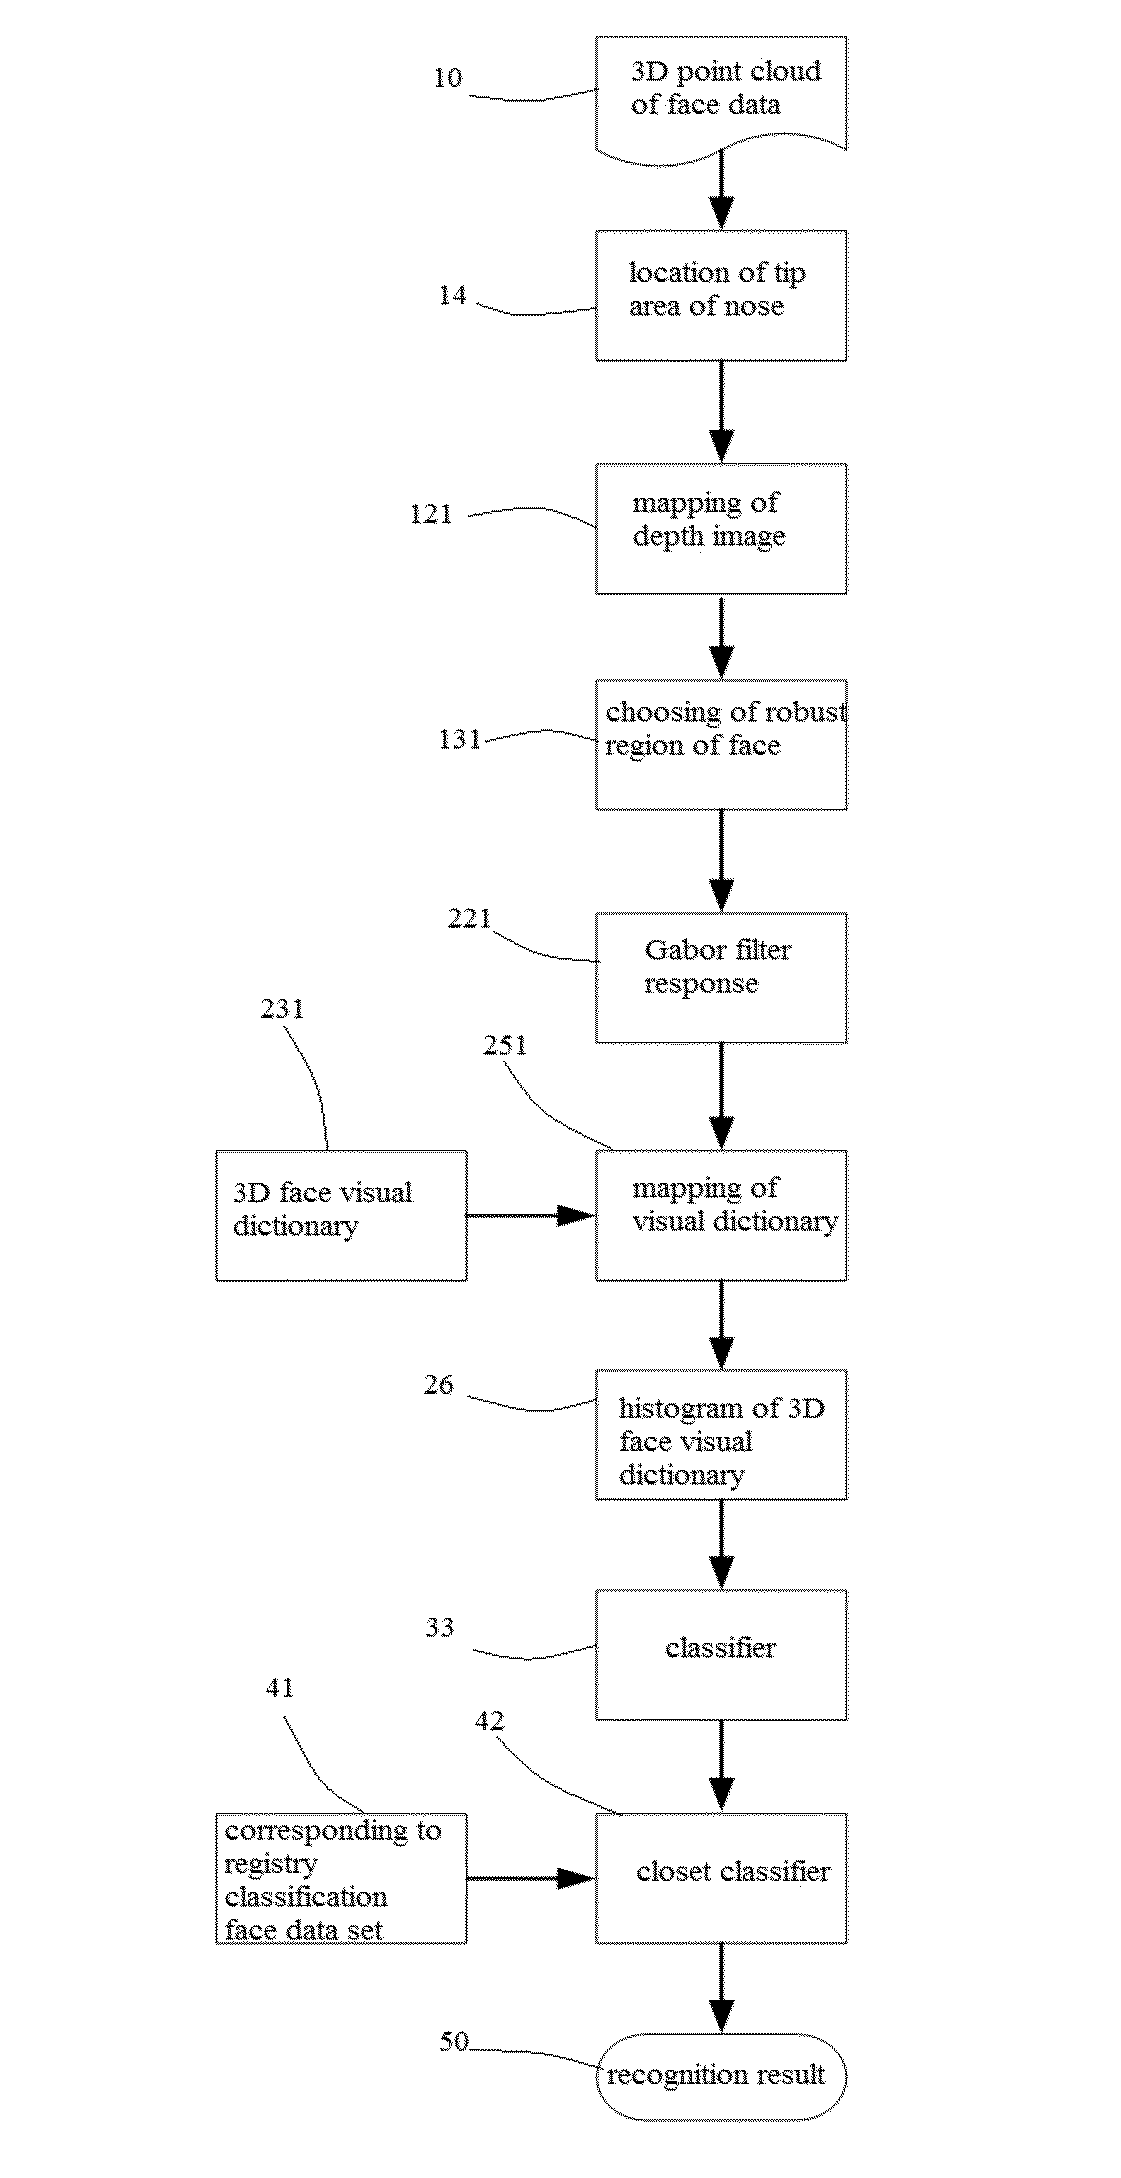 Three-Dimensional Face Recognition Device Based on Three Dimensional Point Cloud and Three-Dimensional Face Recognition Method Based on Three-Dimensional Point Cloud